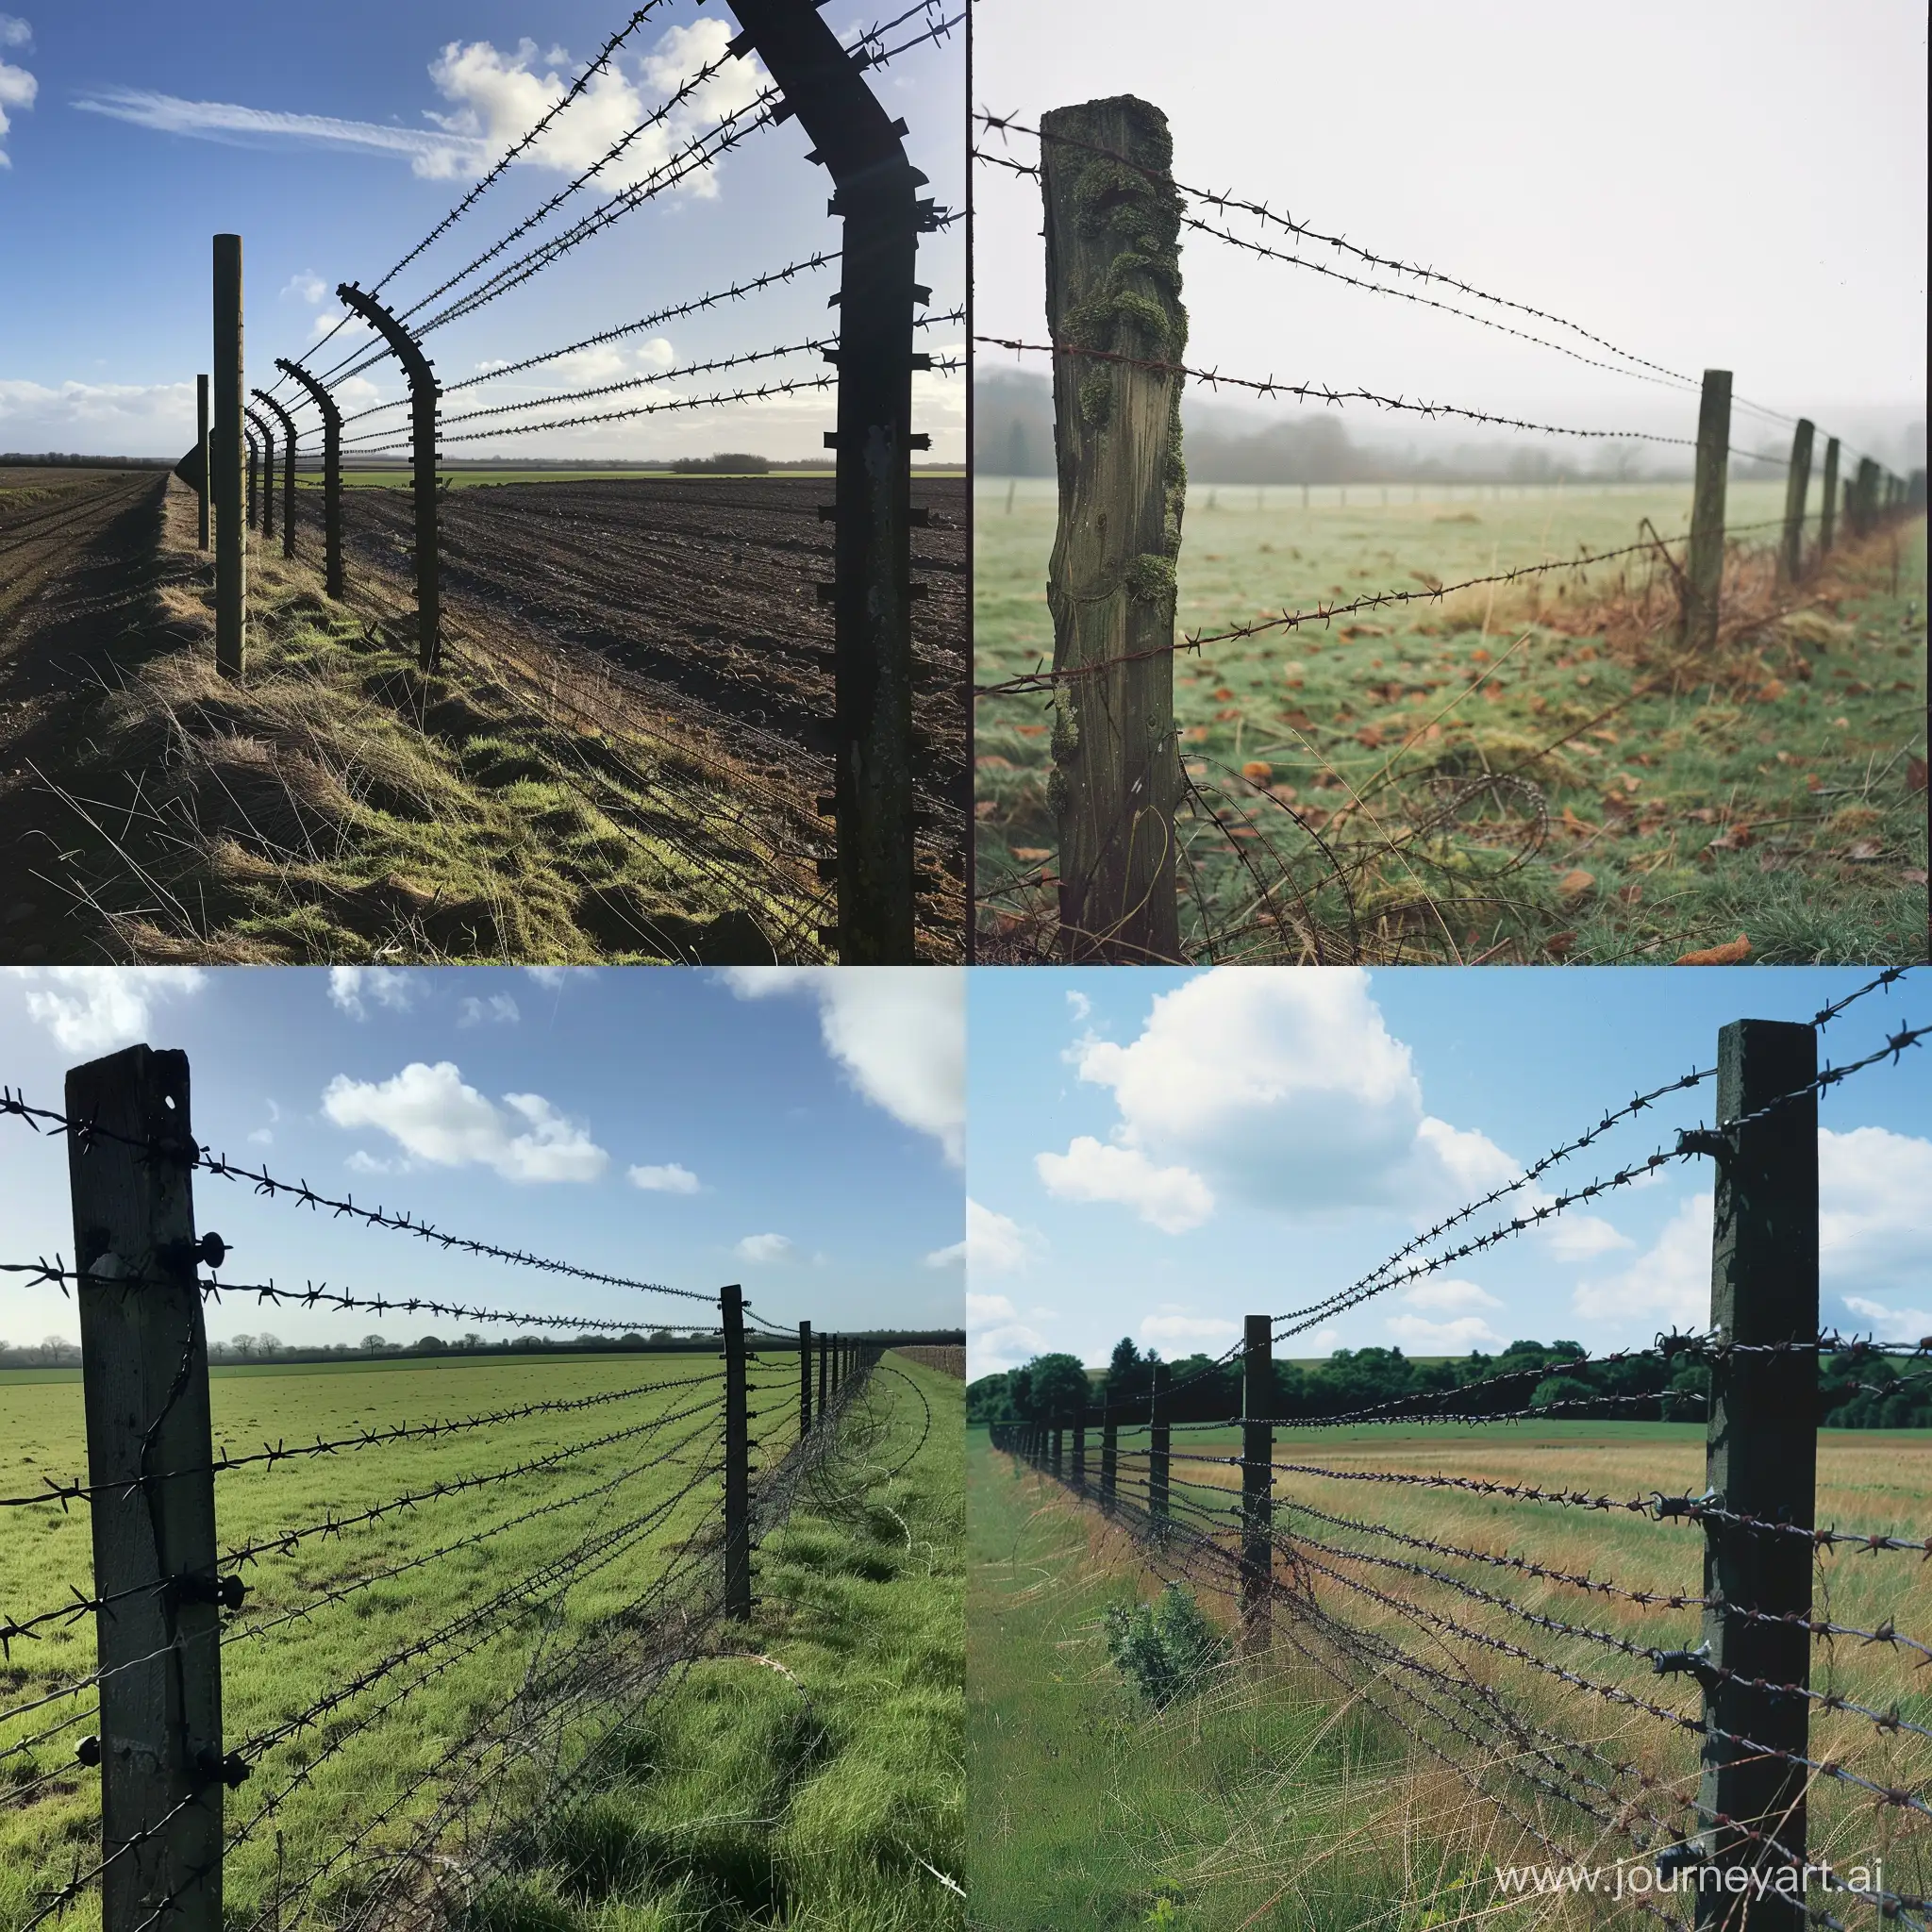 A field protected by barbed wire fence